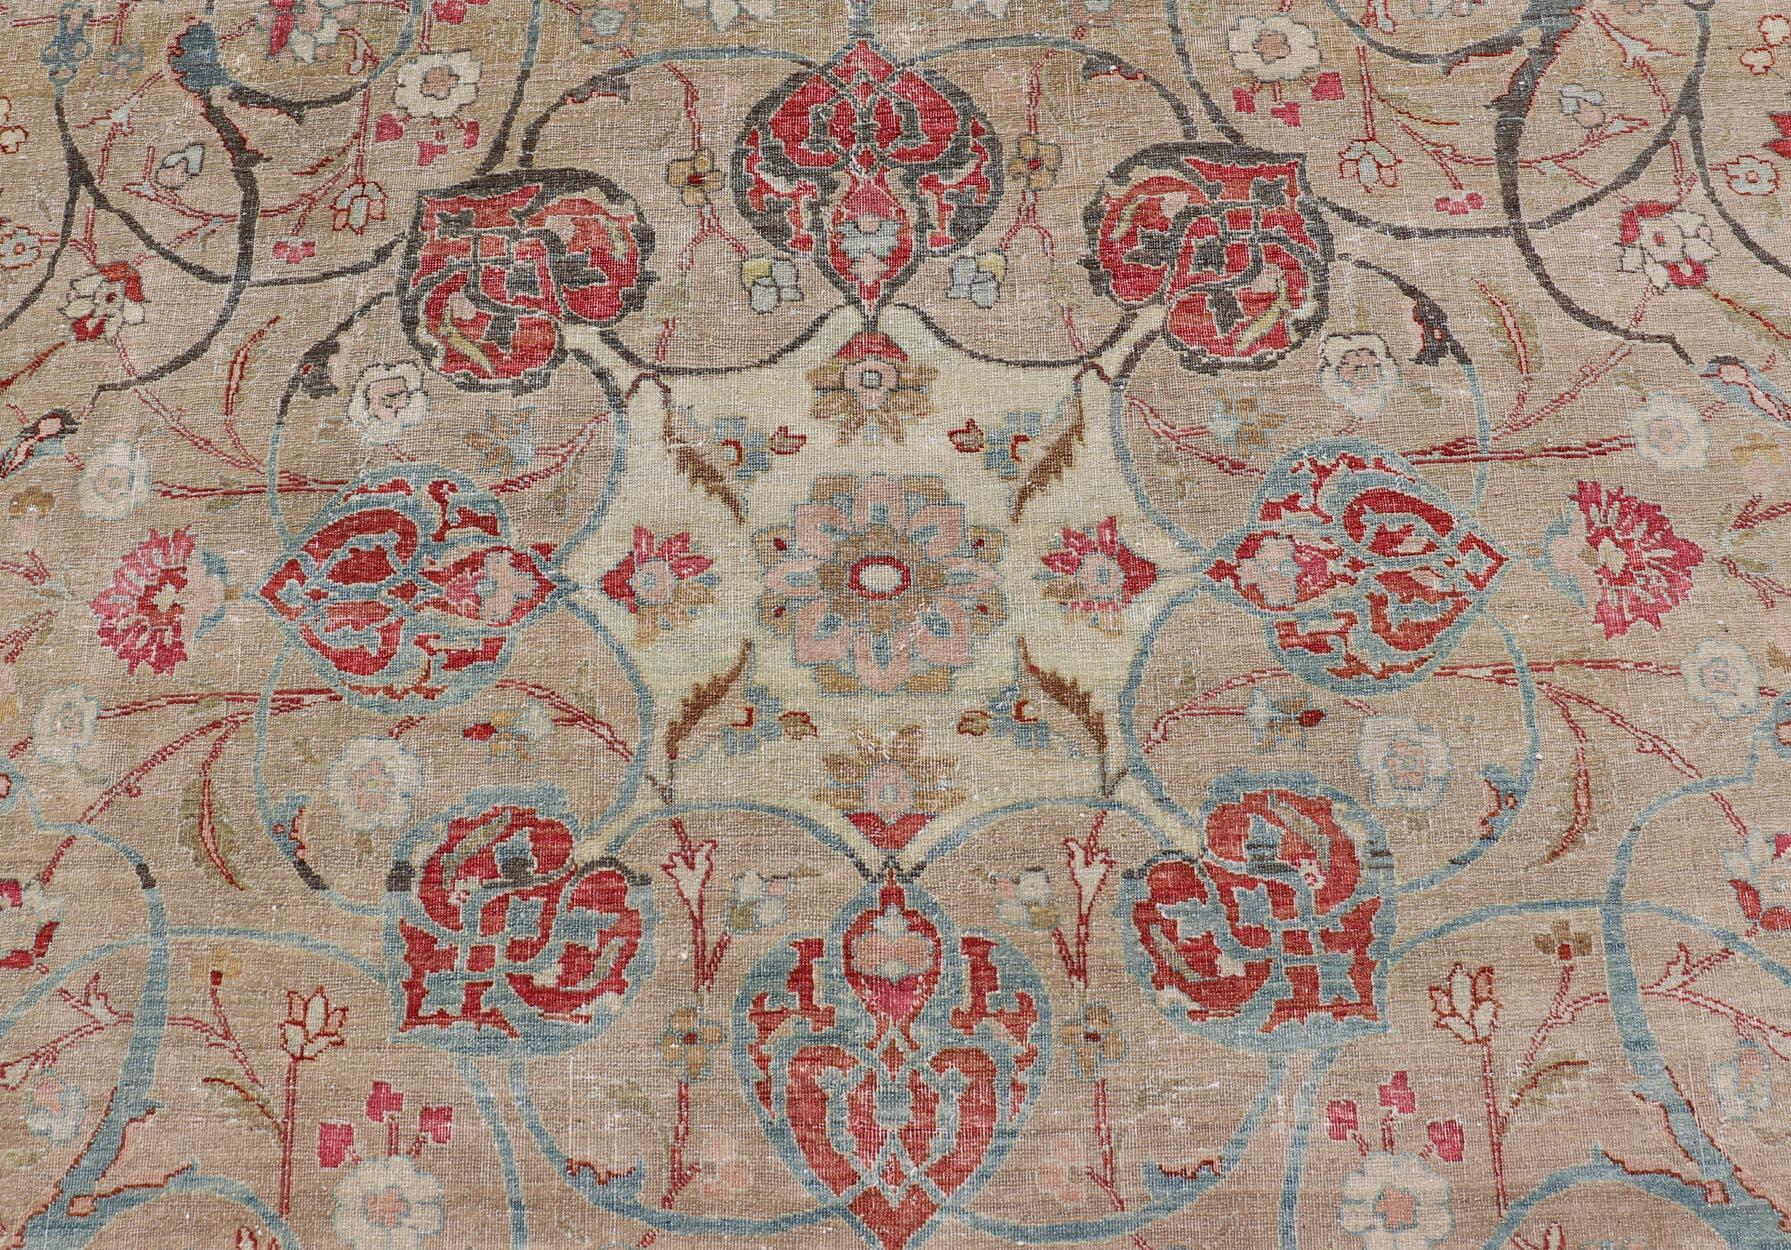 Antique Persian Tabriz Rug with Floral Medallion Design in Tan, Red, and Blue For Sale 6